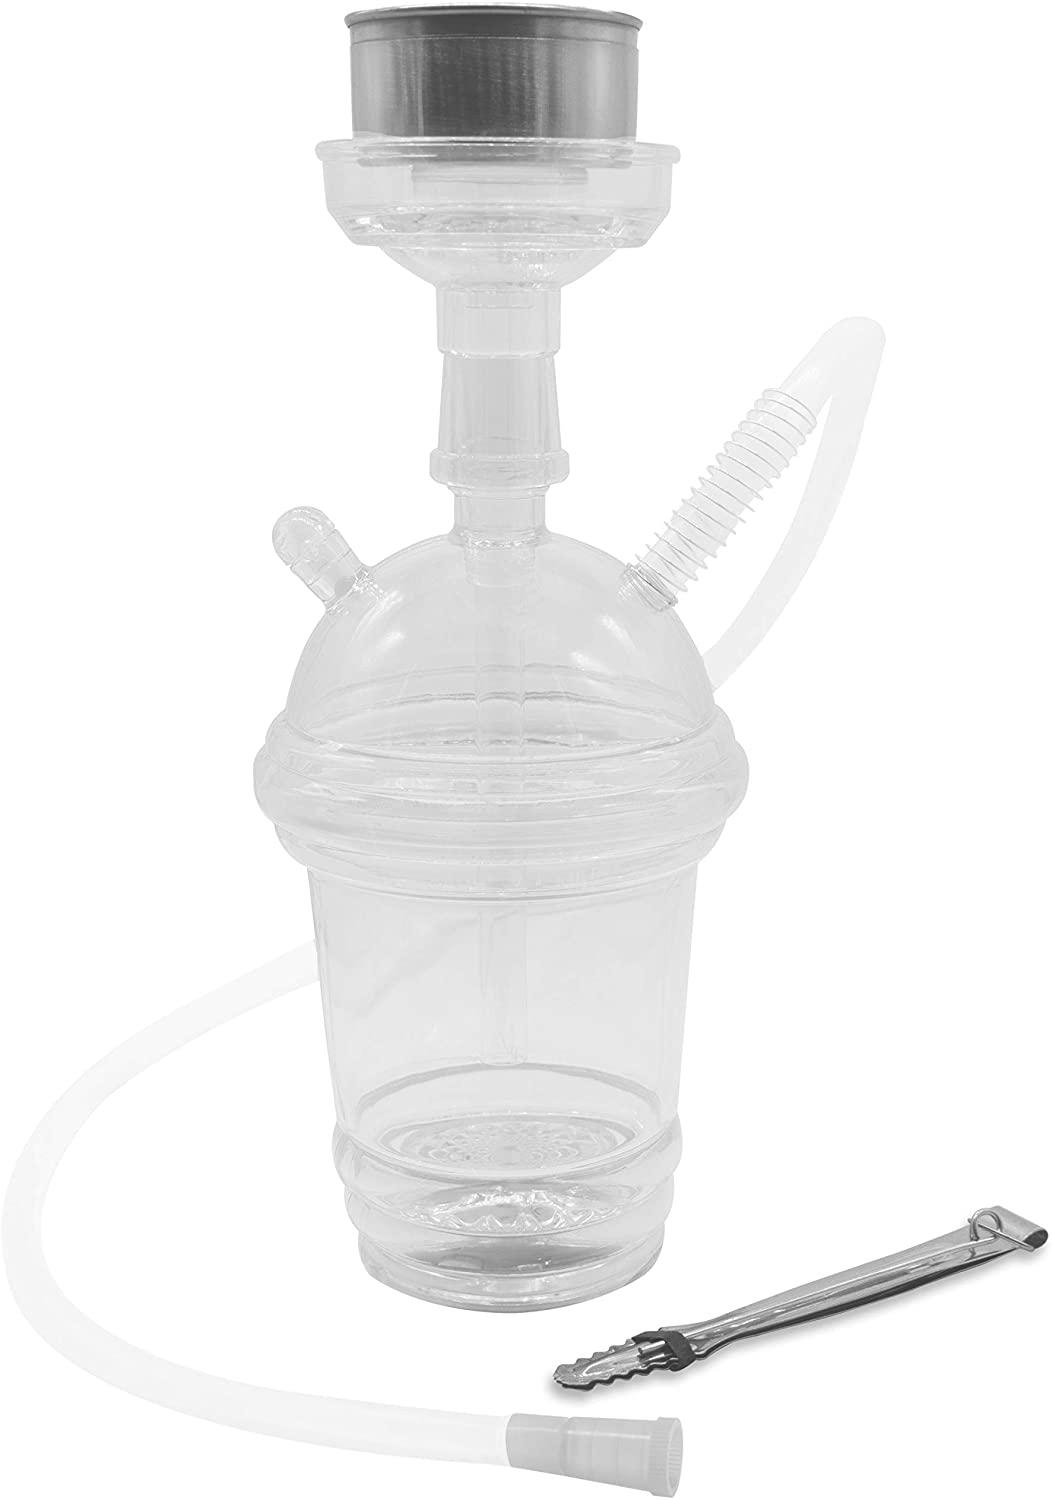 VeeBoost Cup Portable Hookah Set with Shisha Accessories, LED